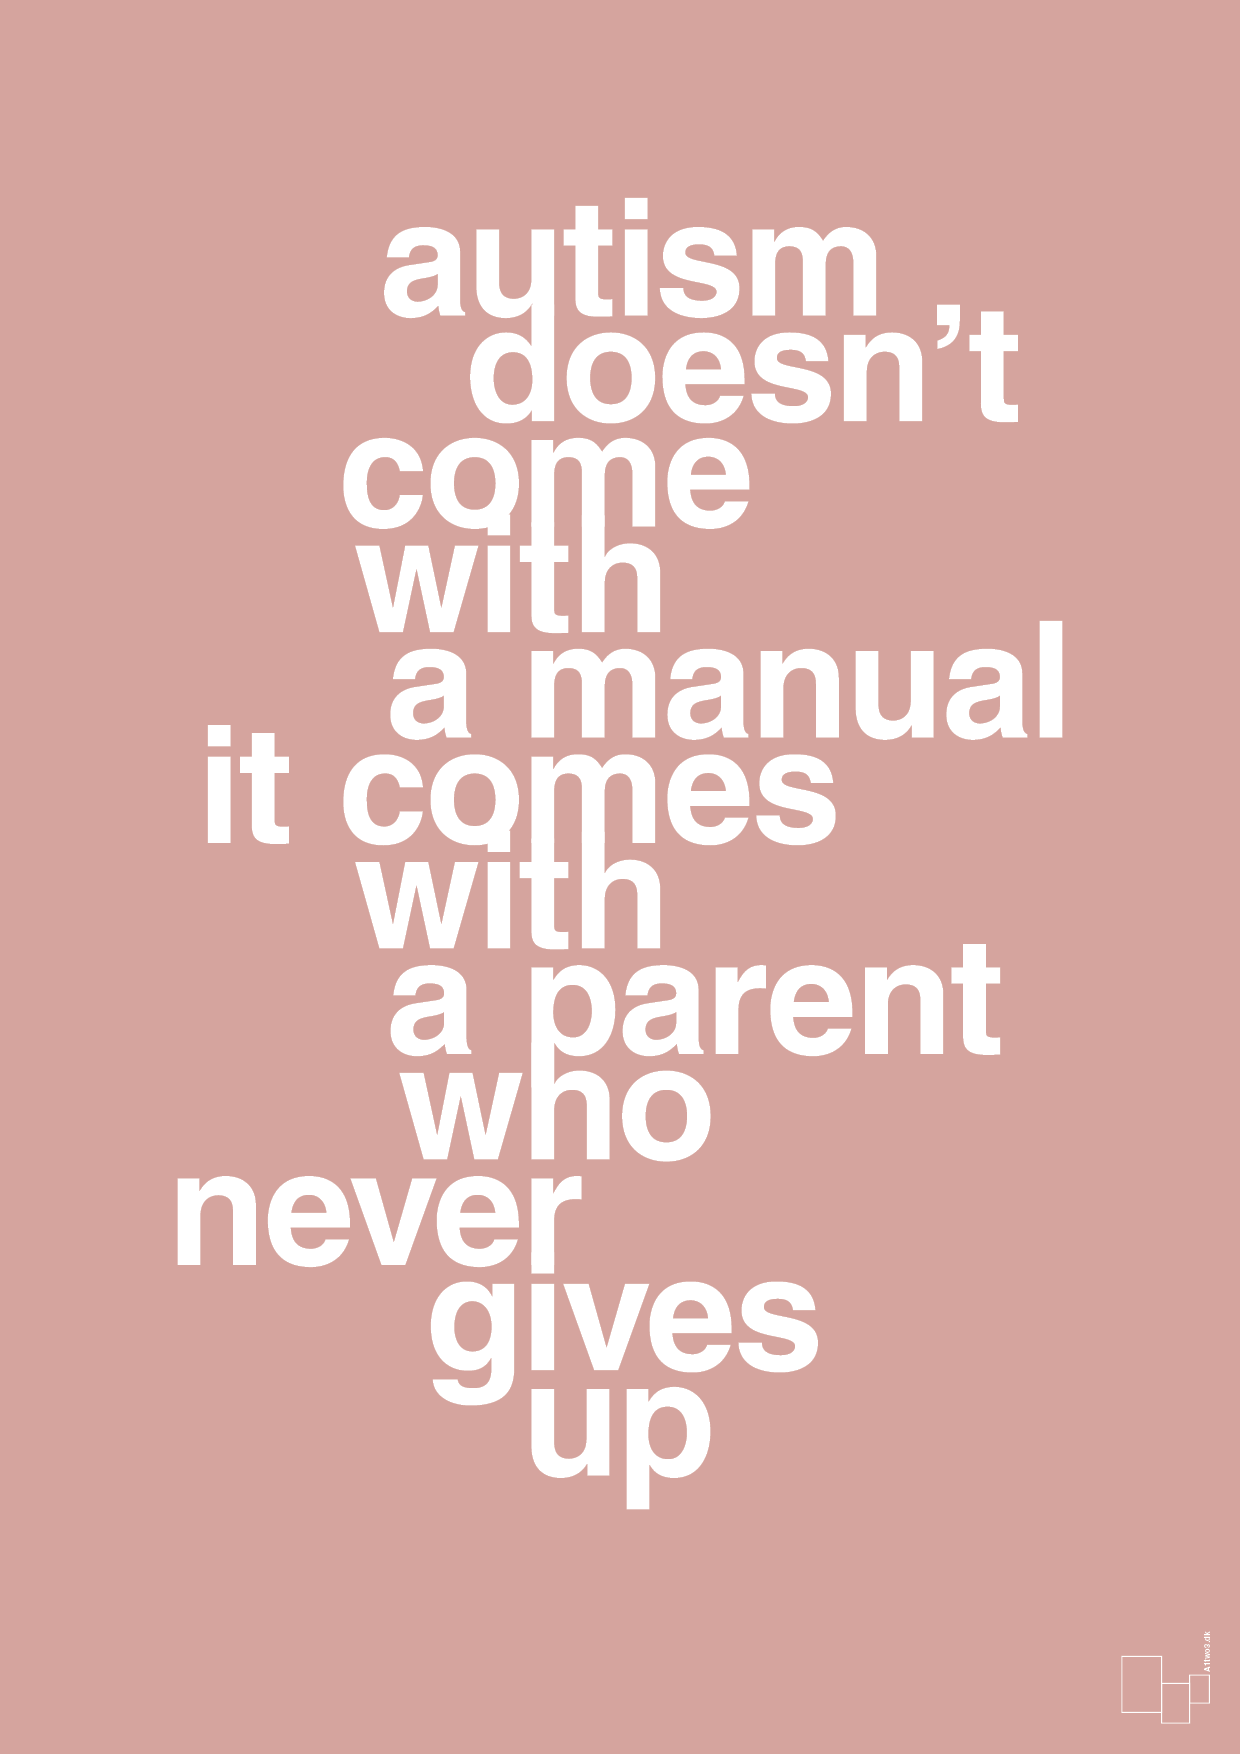 autism doesnt come with a manual it comes with a parent who never gives up - Plakat med Samfund i Bubble Shell